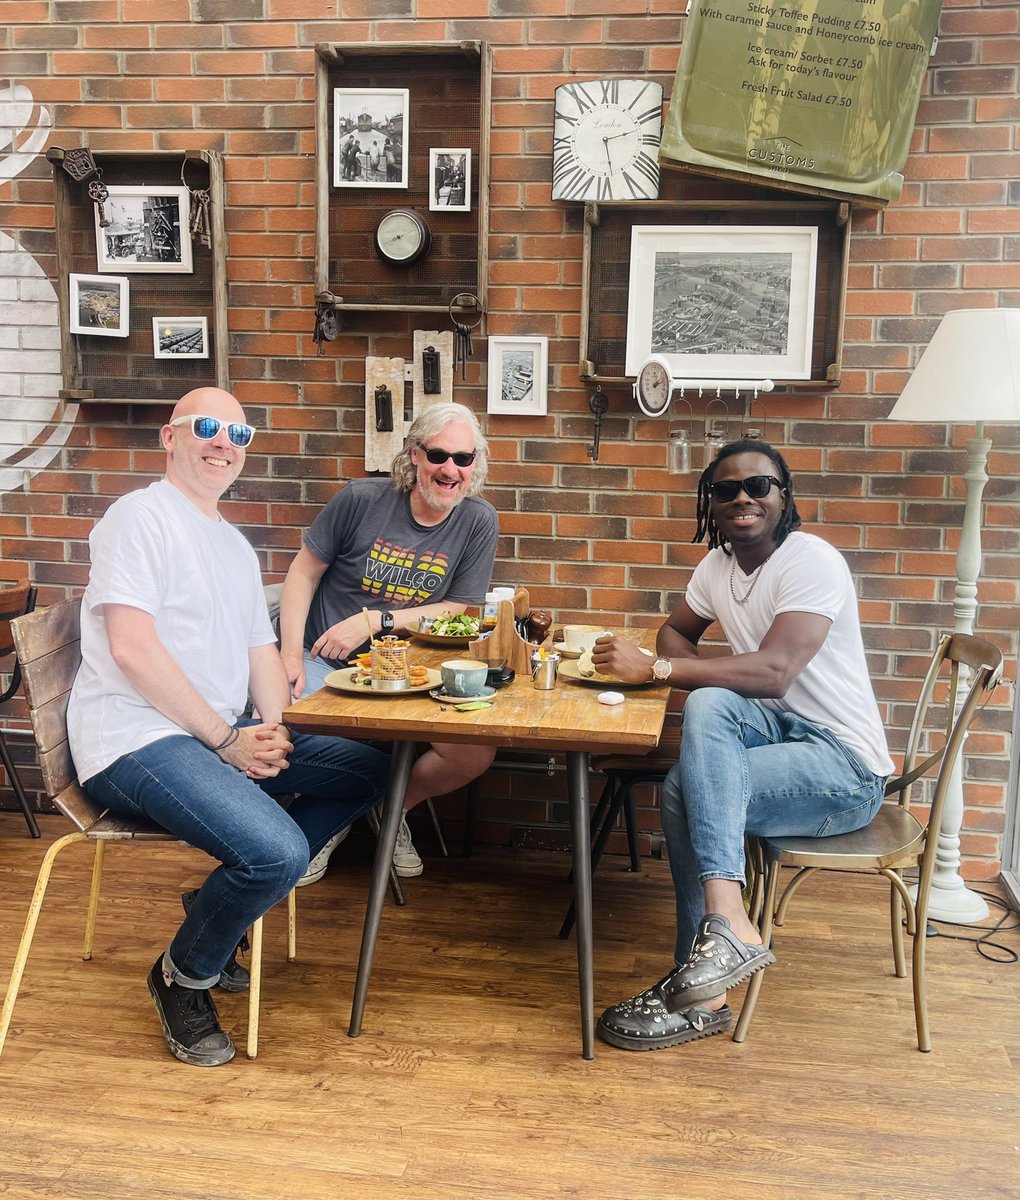 Looks like we’re in the band together 😎😀 Anyway It was great to see you again, watch this space guys! We had a wonderful board meeting with these gentleman @chriswynters and @GruffOwenMusic. Let’s get ready for the summer and autumn and more ☀️🍂 @SixShooterR @LibertinoRecs